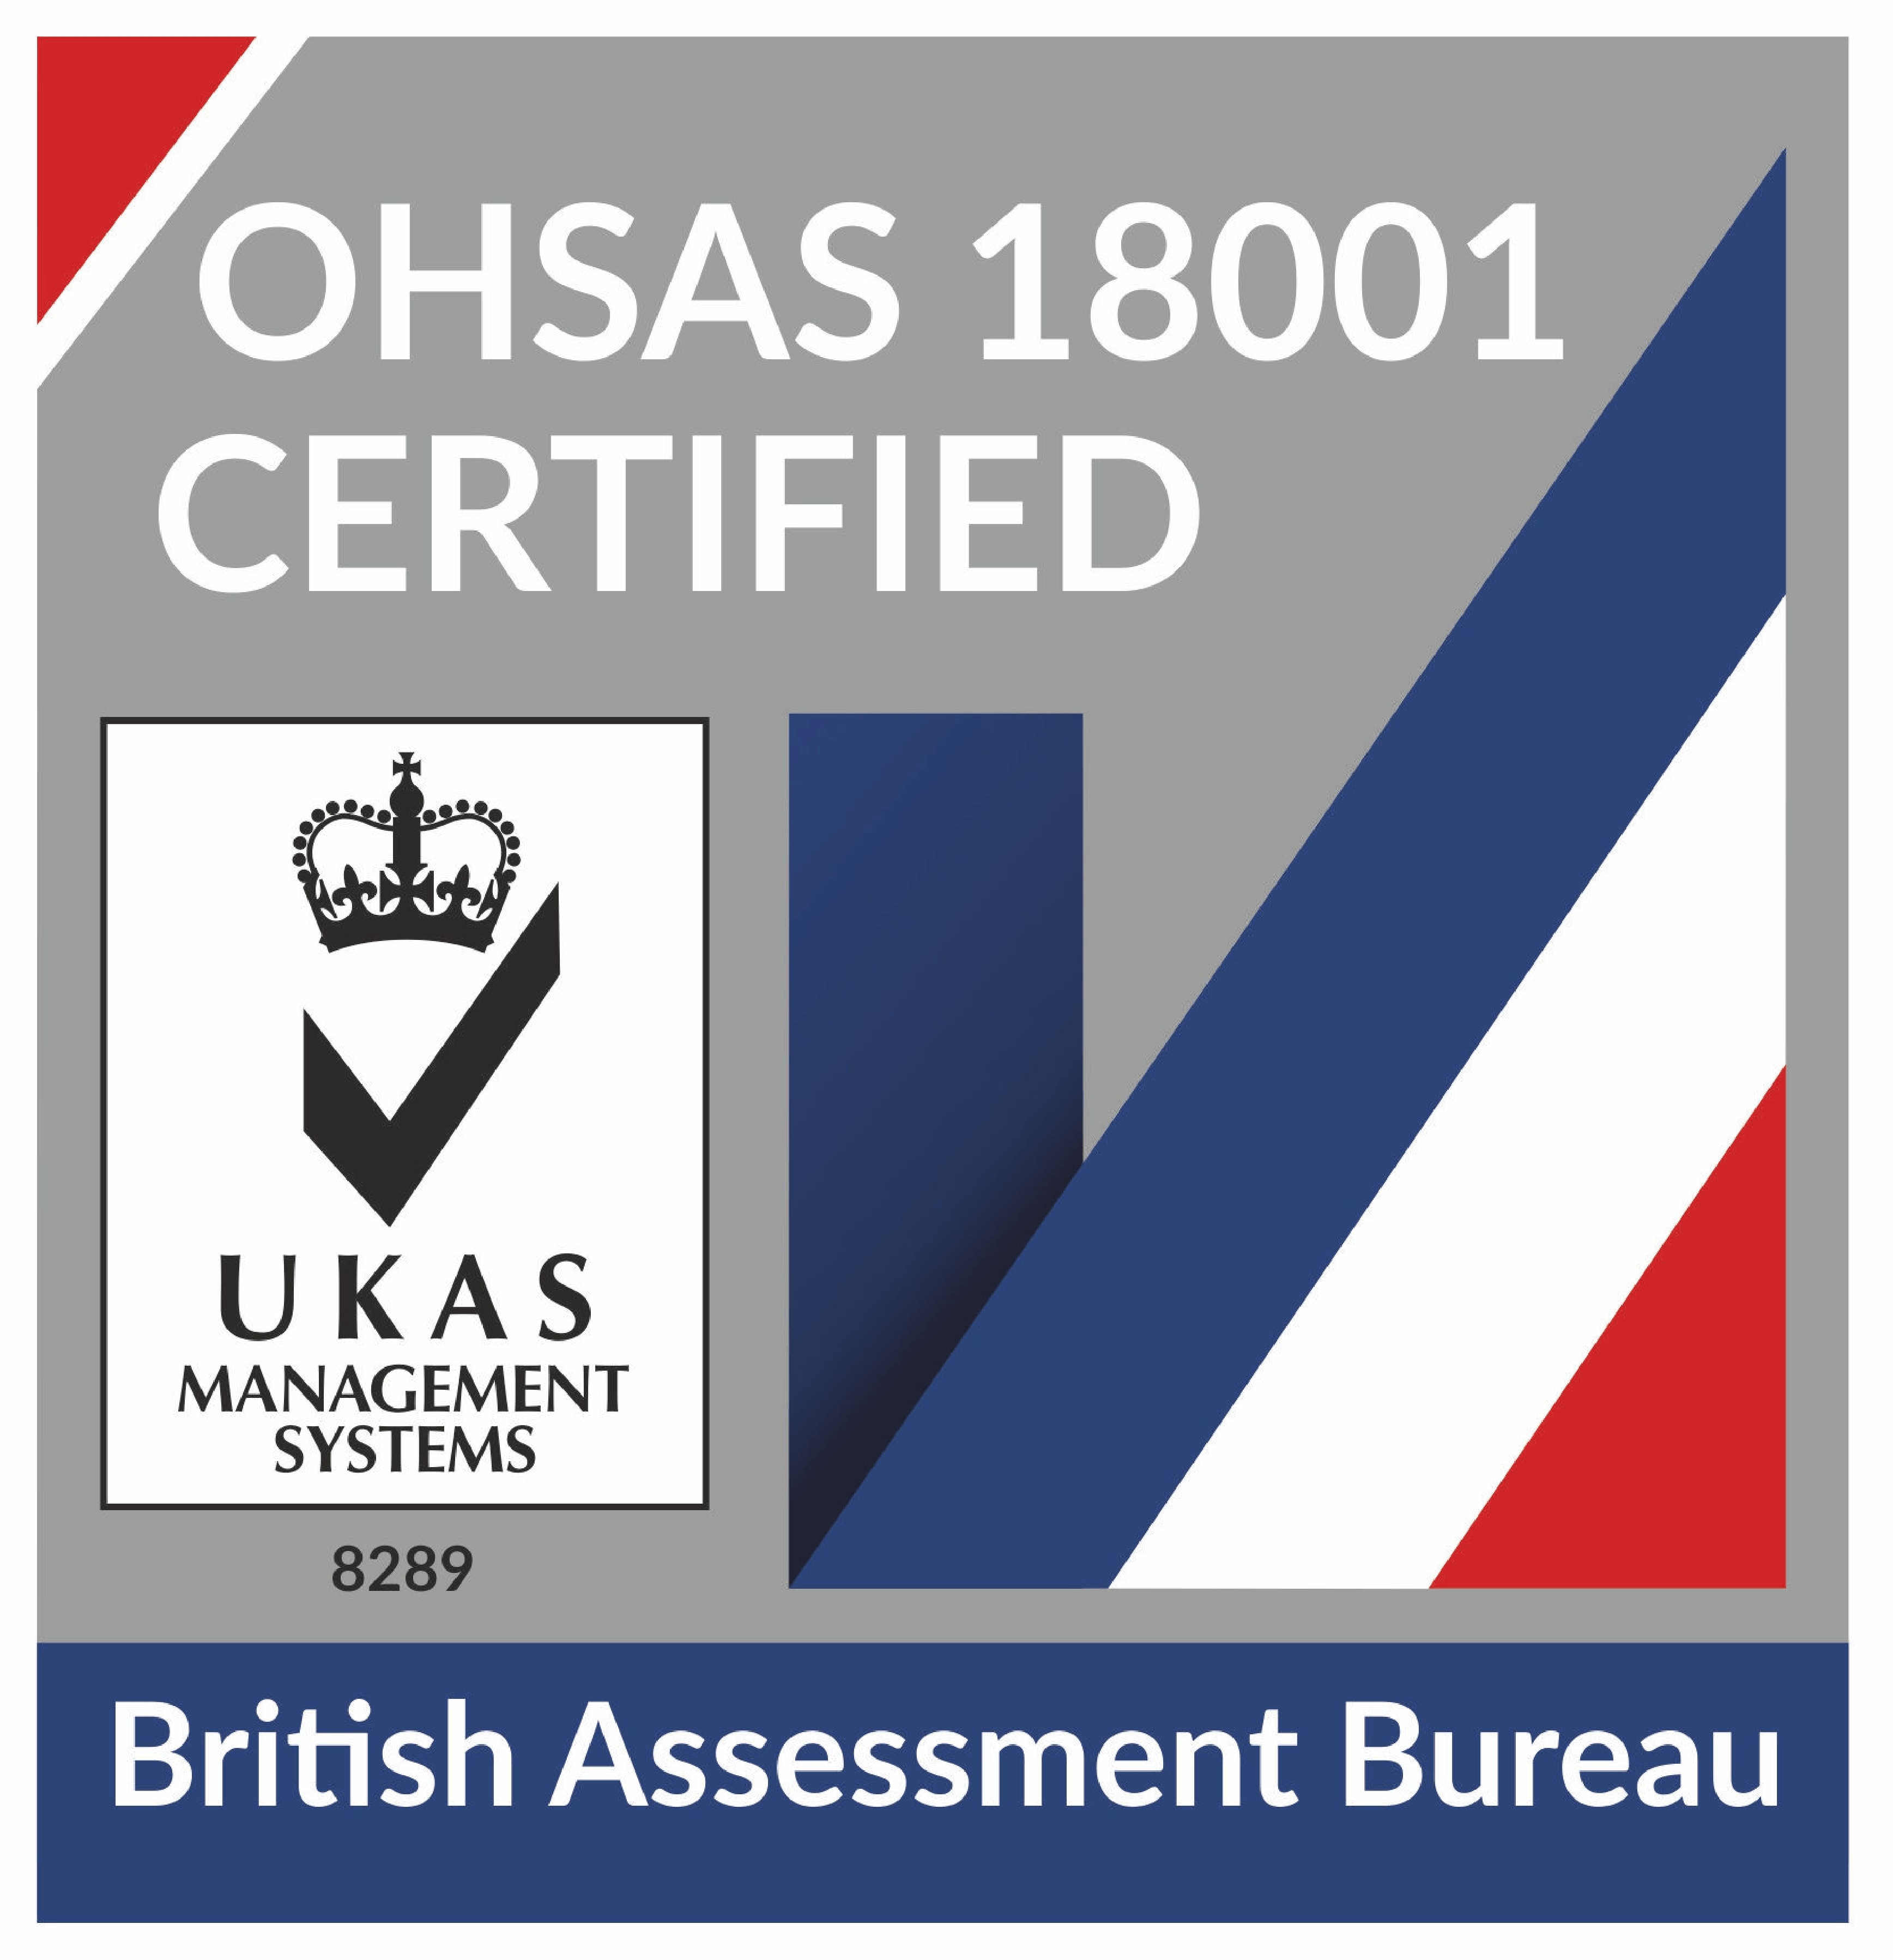 Occupational Health & Safety Management System BS OHSAS 18001: 2007  Chas